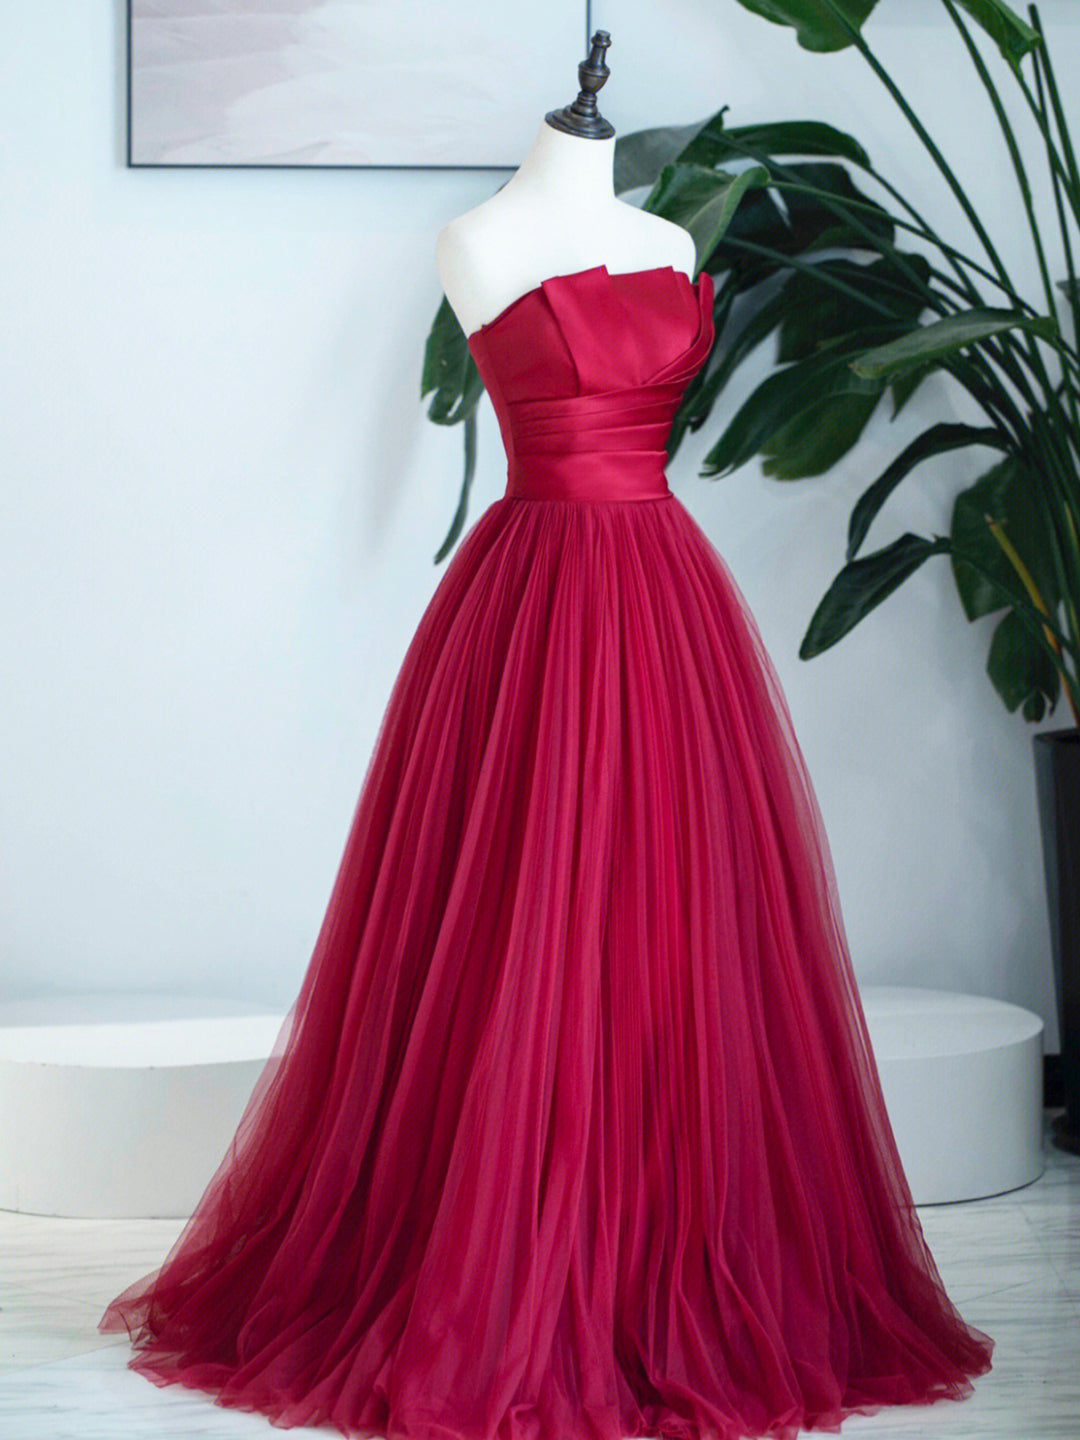 Party Dress Red Colour, Burgundy Strapless Tulle Prom Dress, Burgundy Long Formal Dress